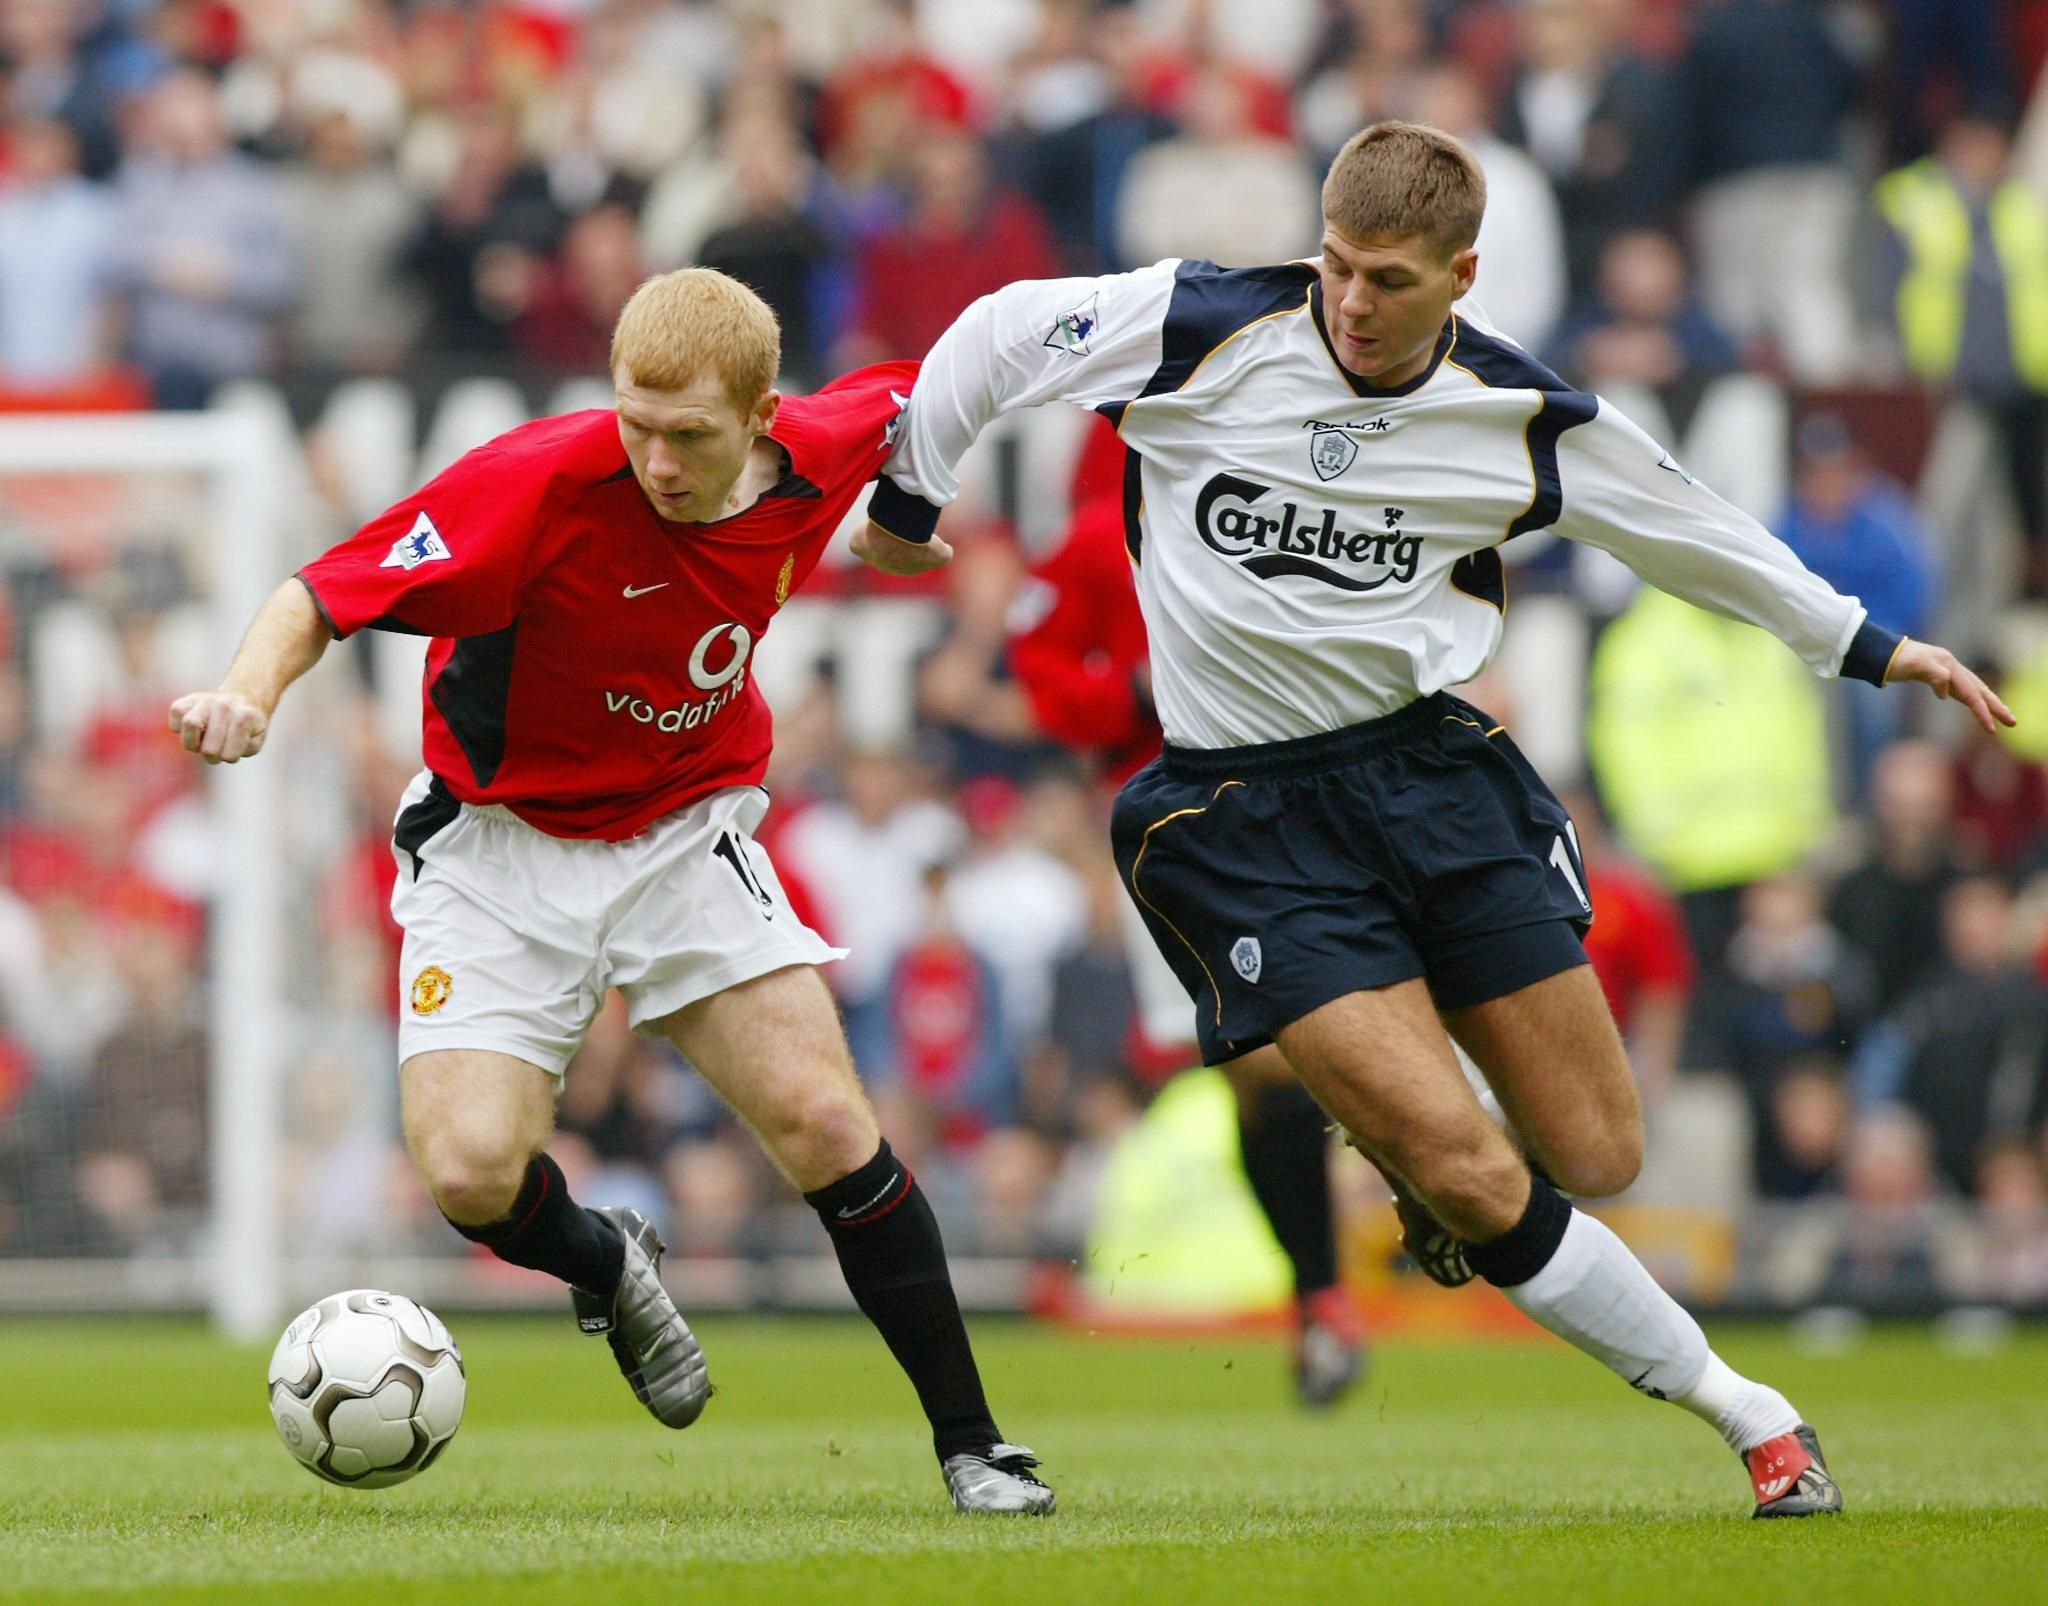 Scholes and Gerrard in action at Old Trafford